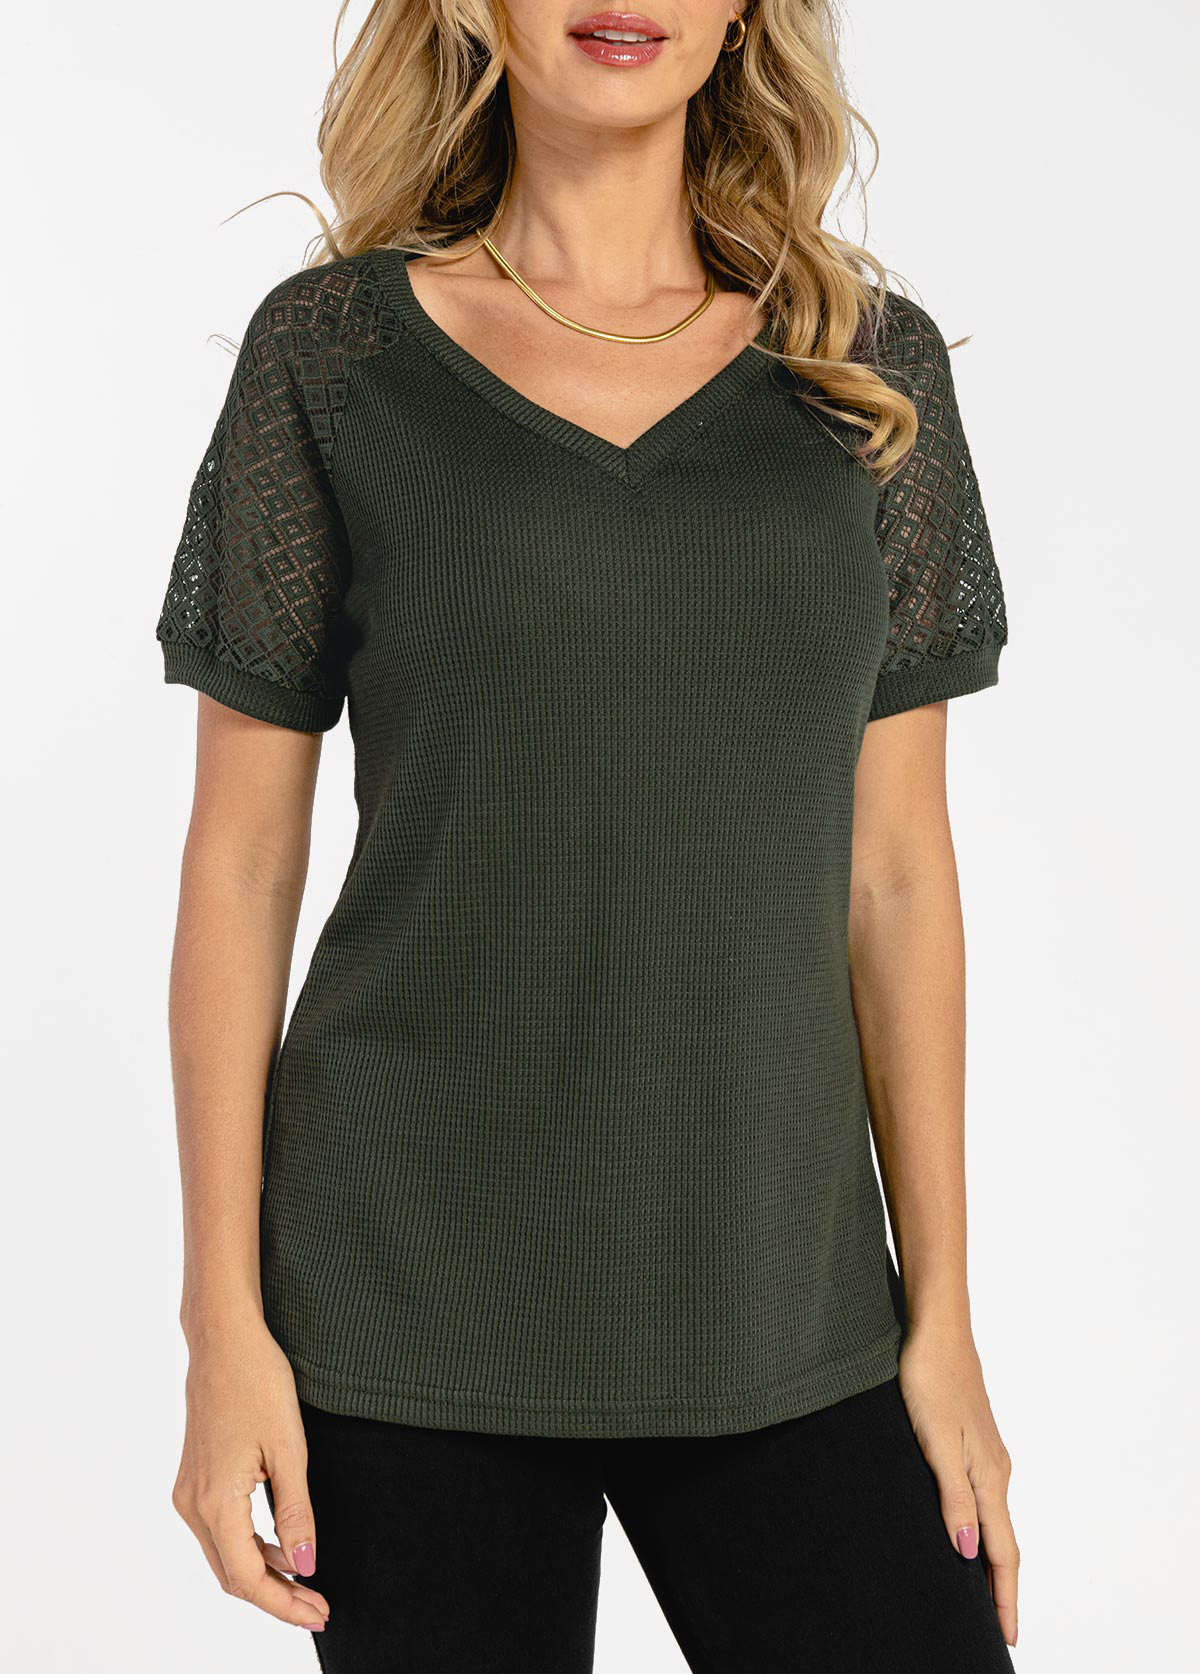 Lace Patchwork Army Green Waffle Knit T Shirt